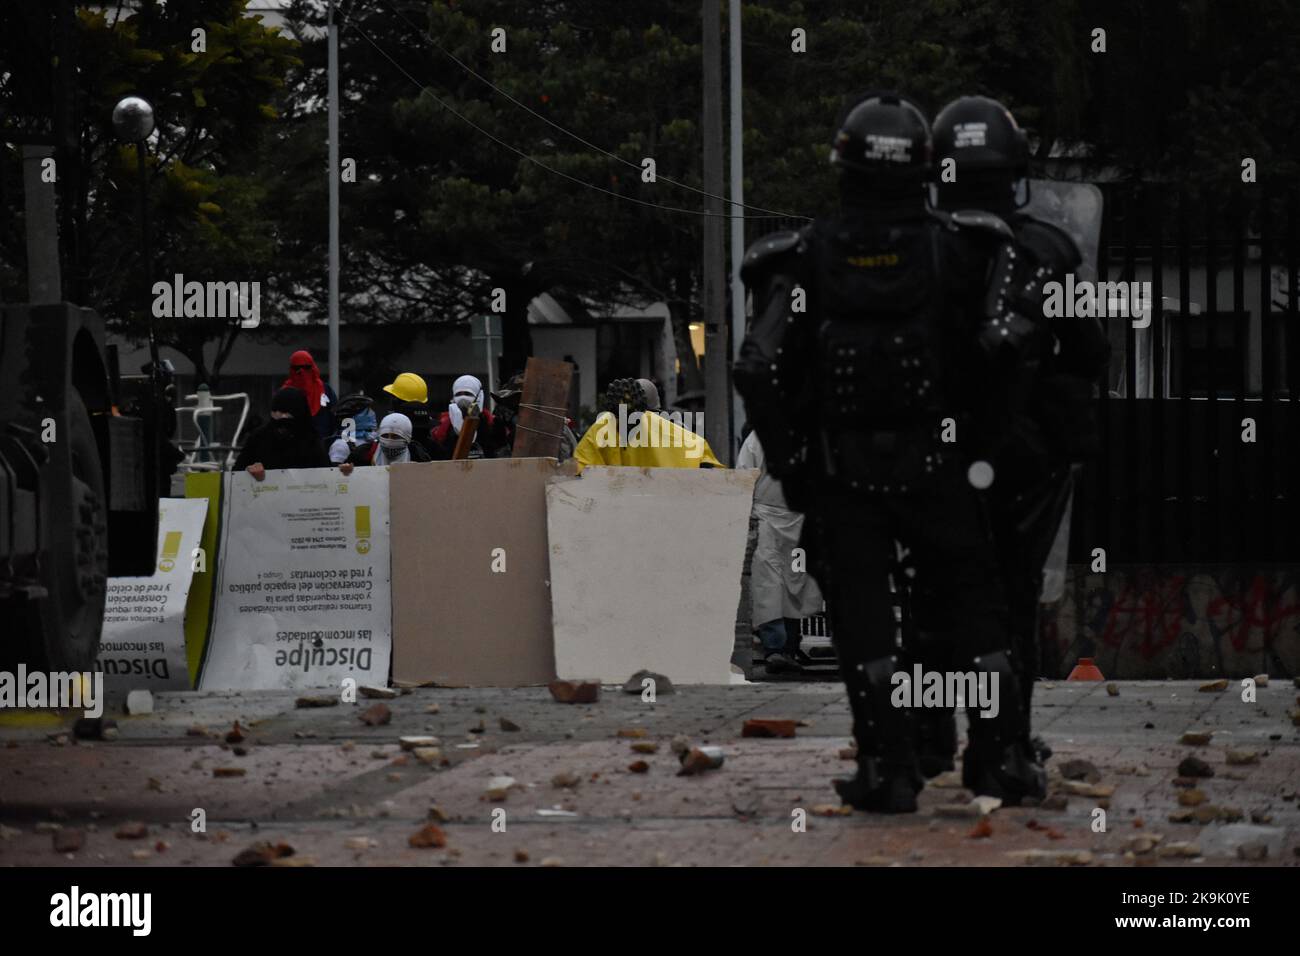 Colombia's anti-riot police squadron (UNDOMO) formerly knwon as ESMAD clashes with demonstrators as protests raise in Bogota, Colombia amid the liberation of political prisioners captured during the last year anti-government protests, on October 28, 2022. Photo by: Cristian Bayona/Long Visual Press Stock Photo